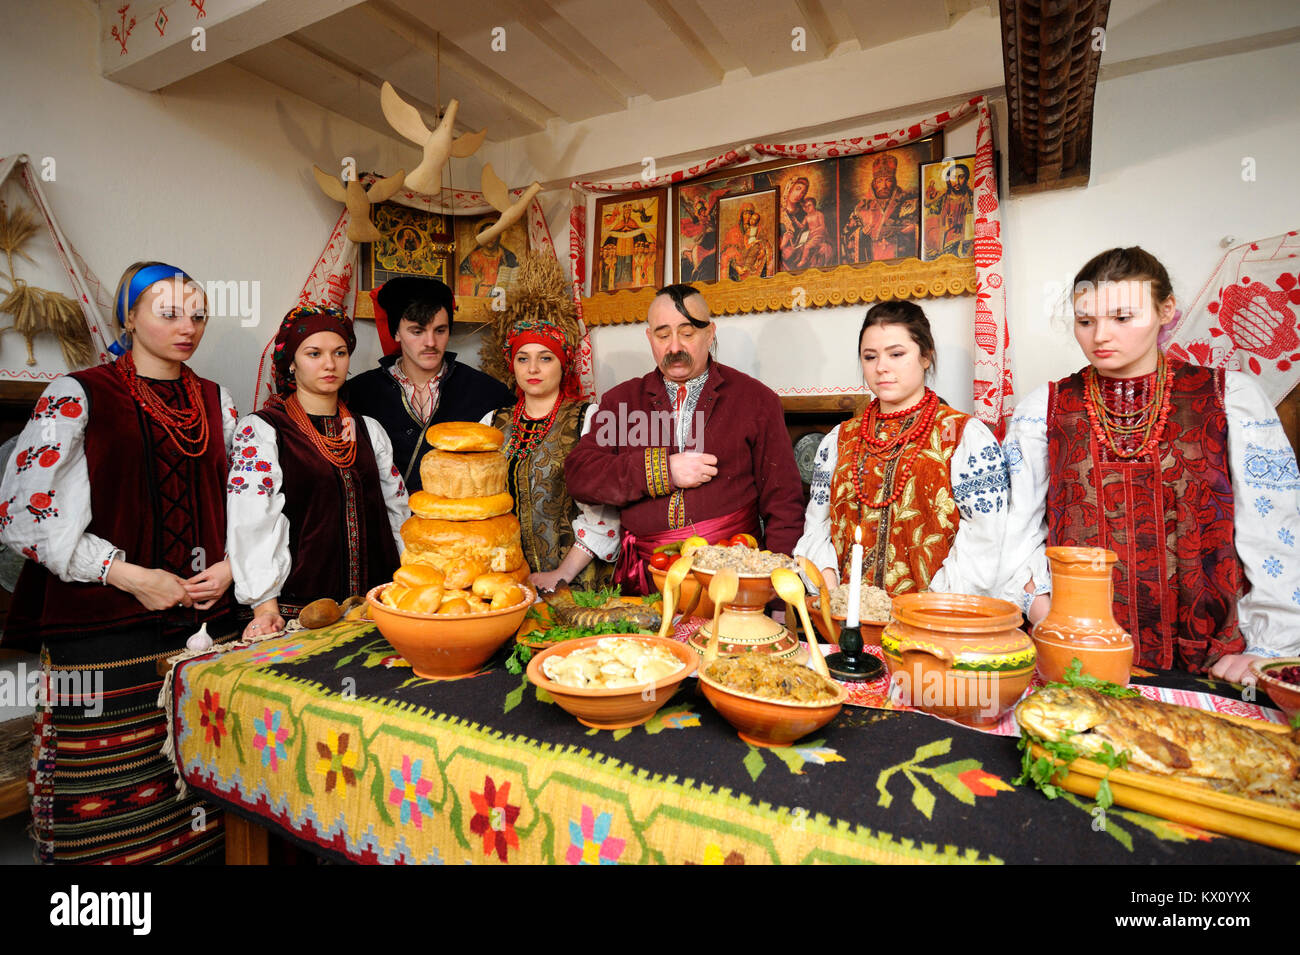 People in Ukrainian native dresses standing behind table to celebrate Christmas Eve. Reconstruction of folk traditions. January 4, 2018. Kiev, Ukraine Stock Photo